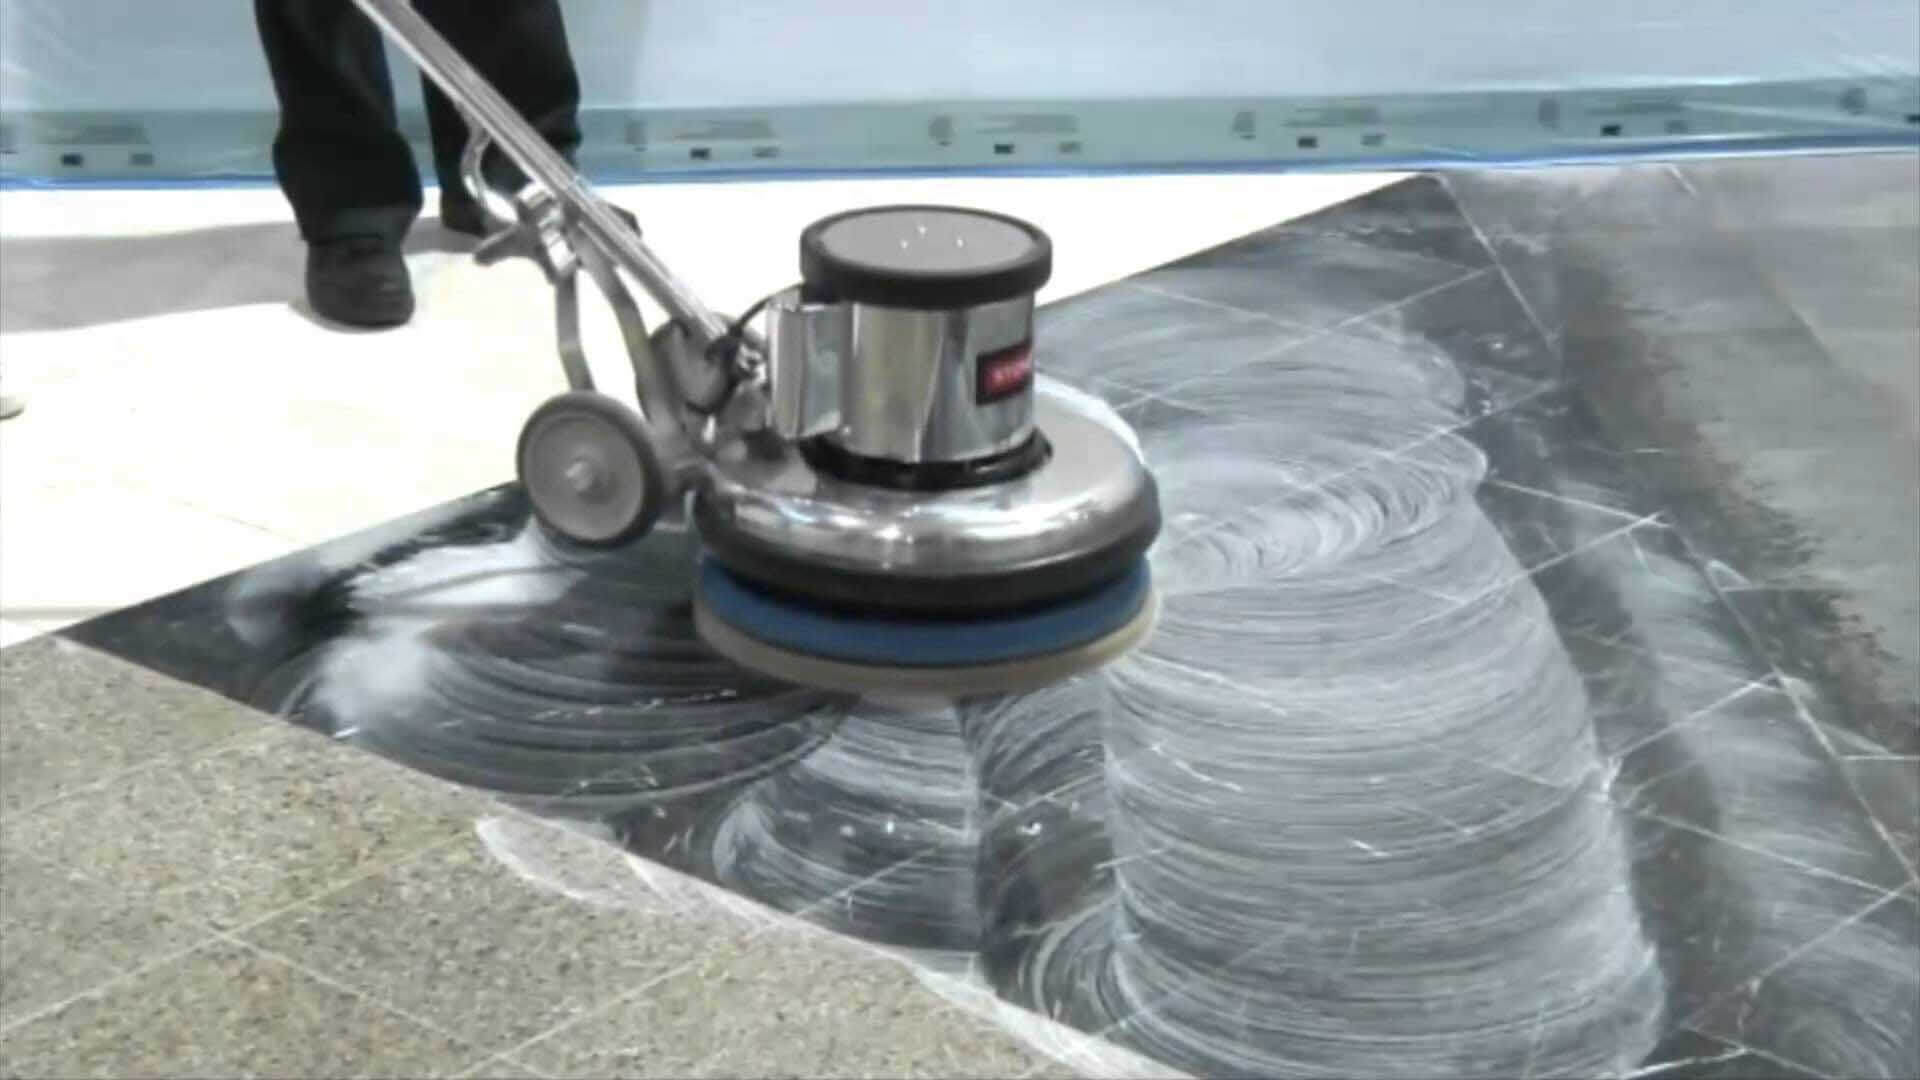 marble cleaning services